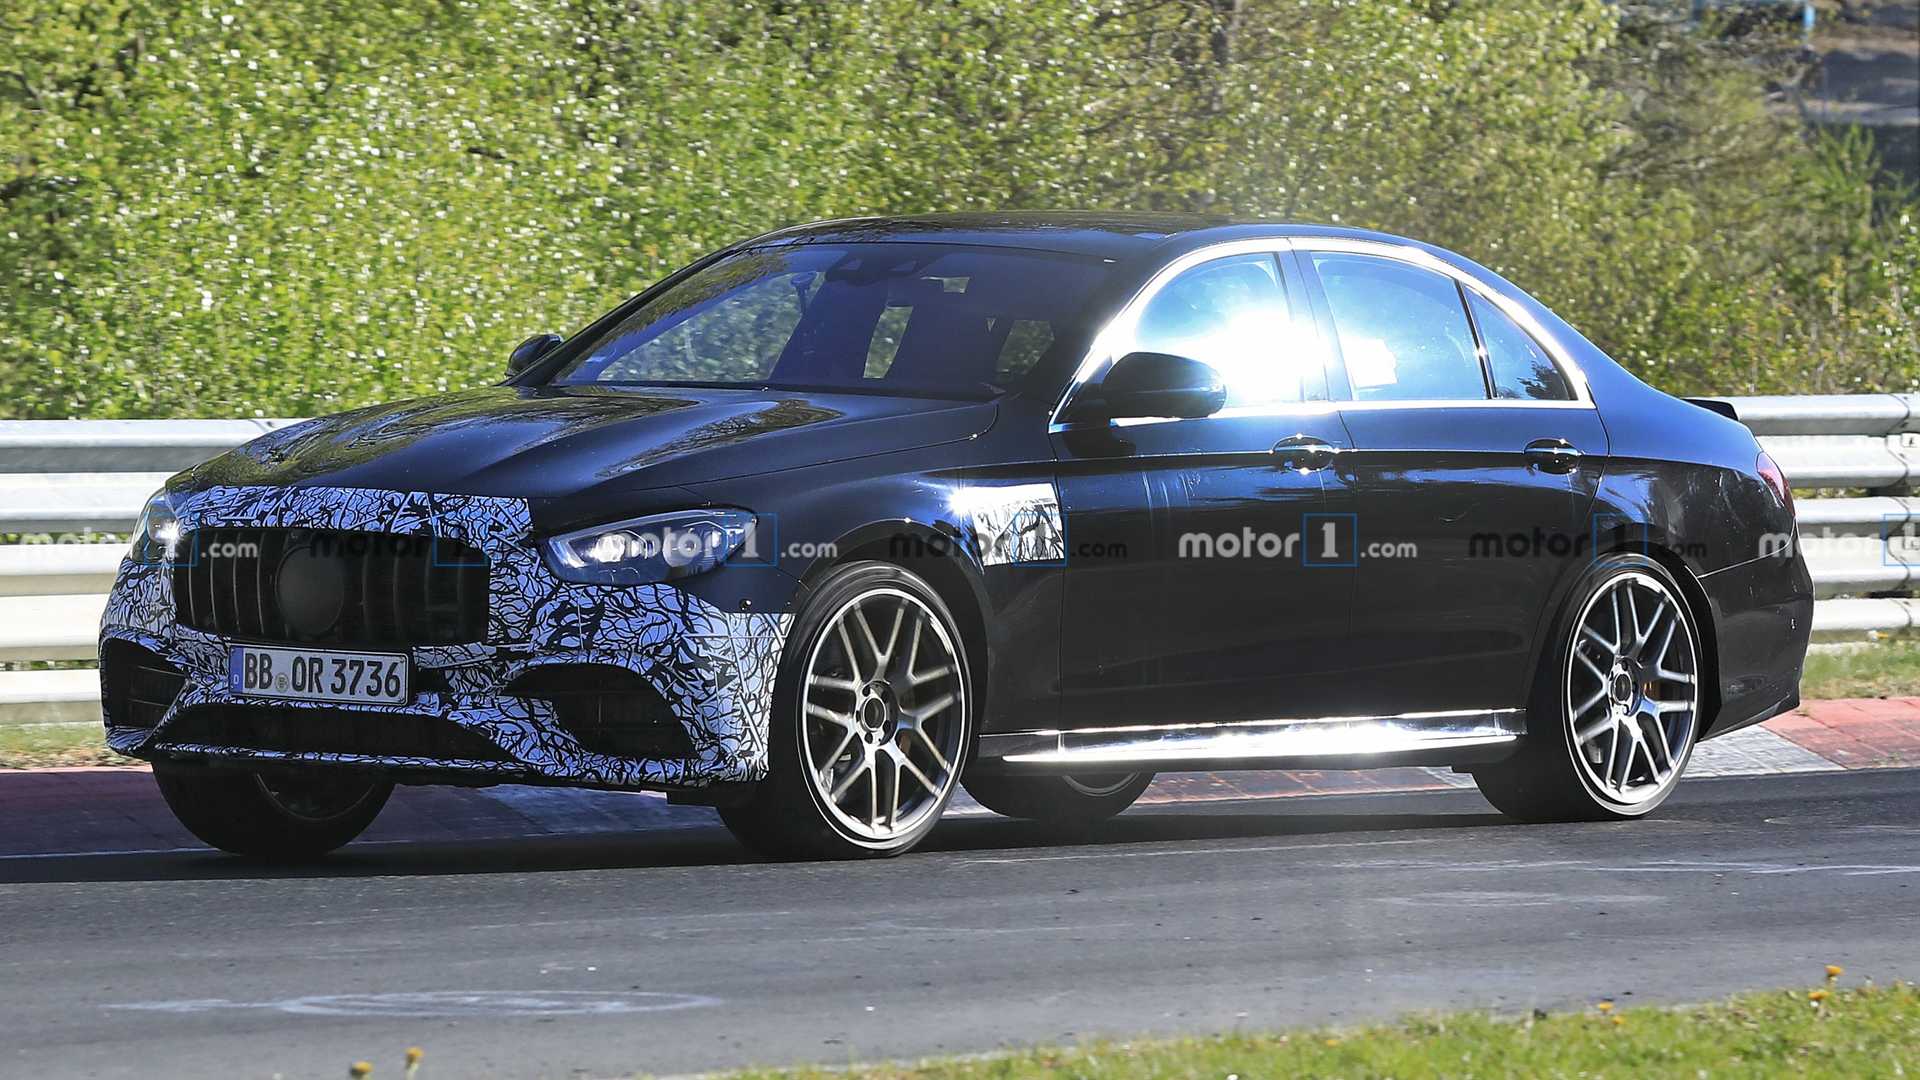 Mercedes AMG E63 Sedan Spied With Minimal Camouflage